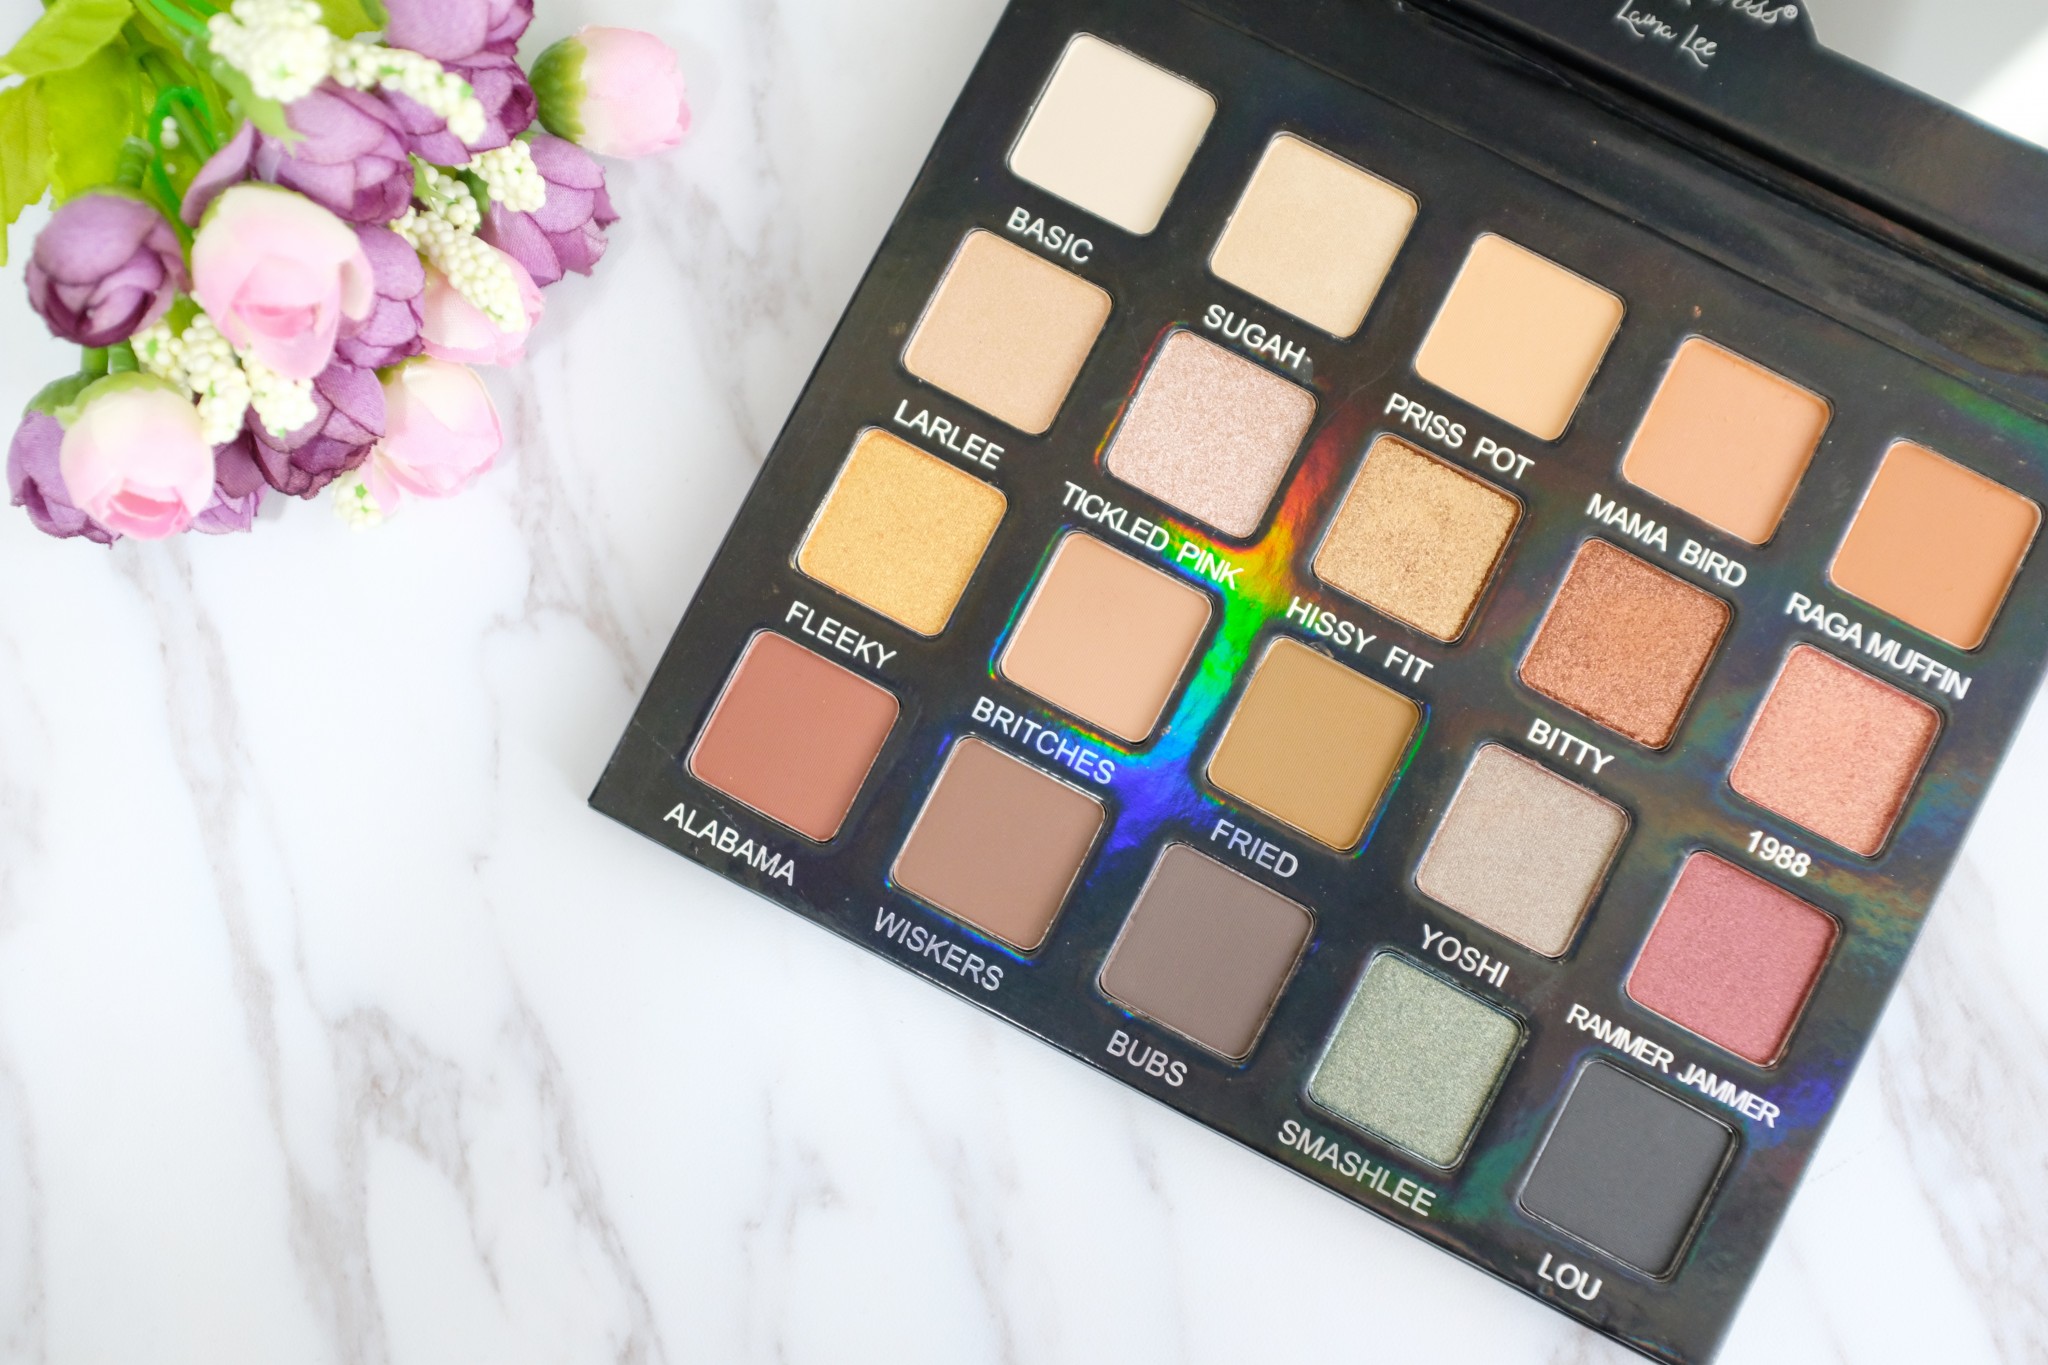 Violet Voss x Laura Lee Pro Eye Shadows Palette Swatches